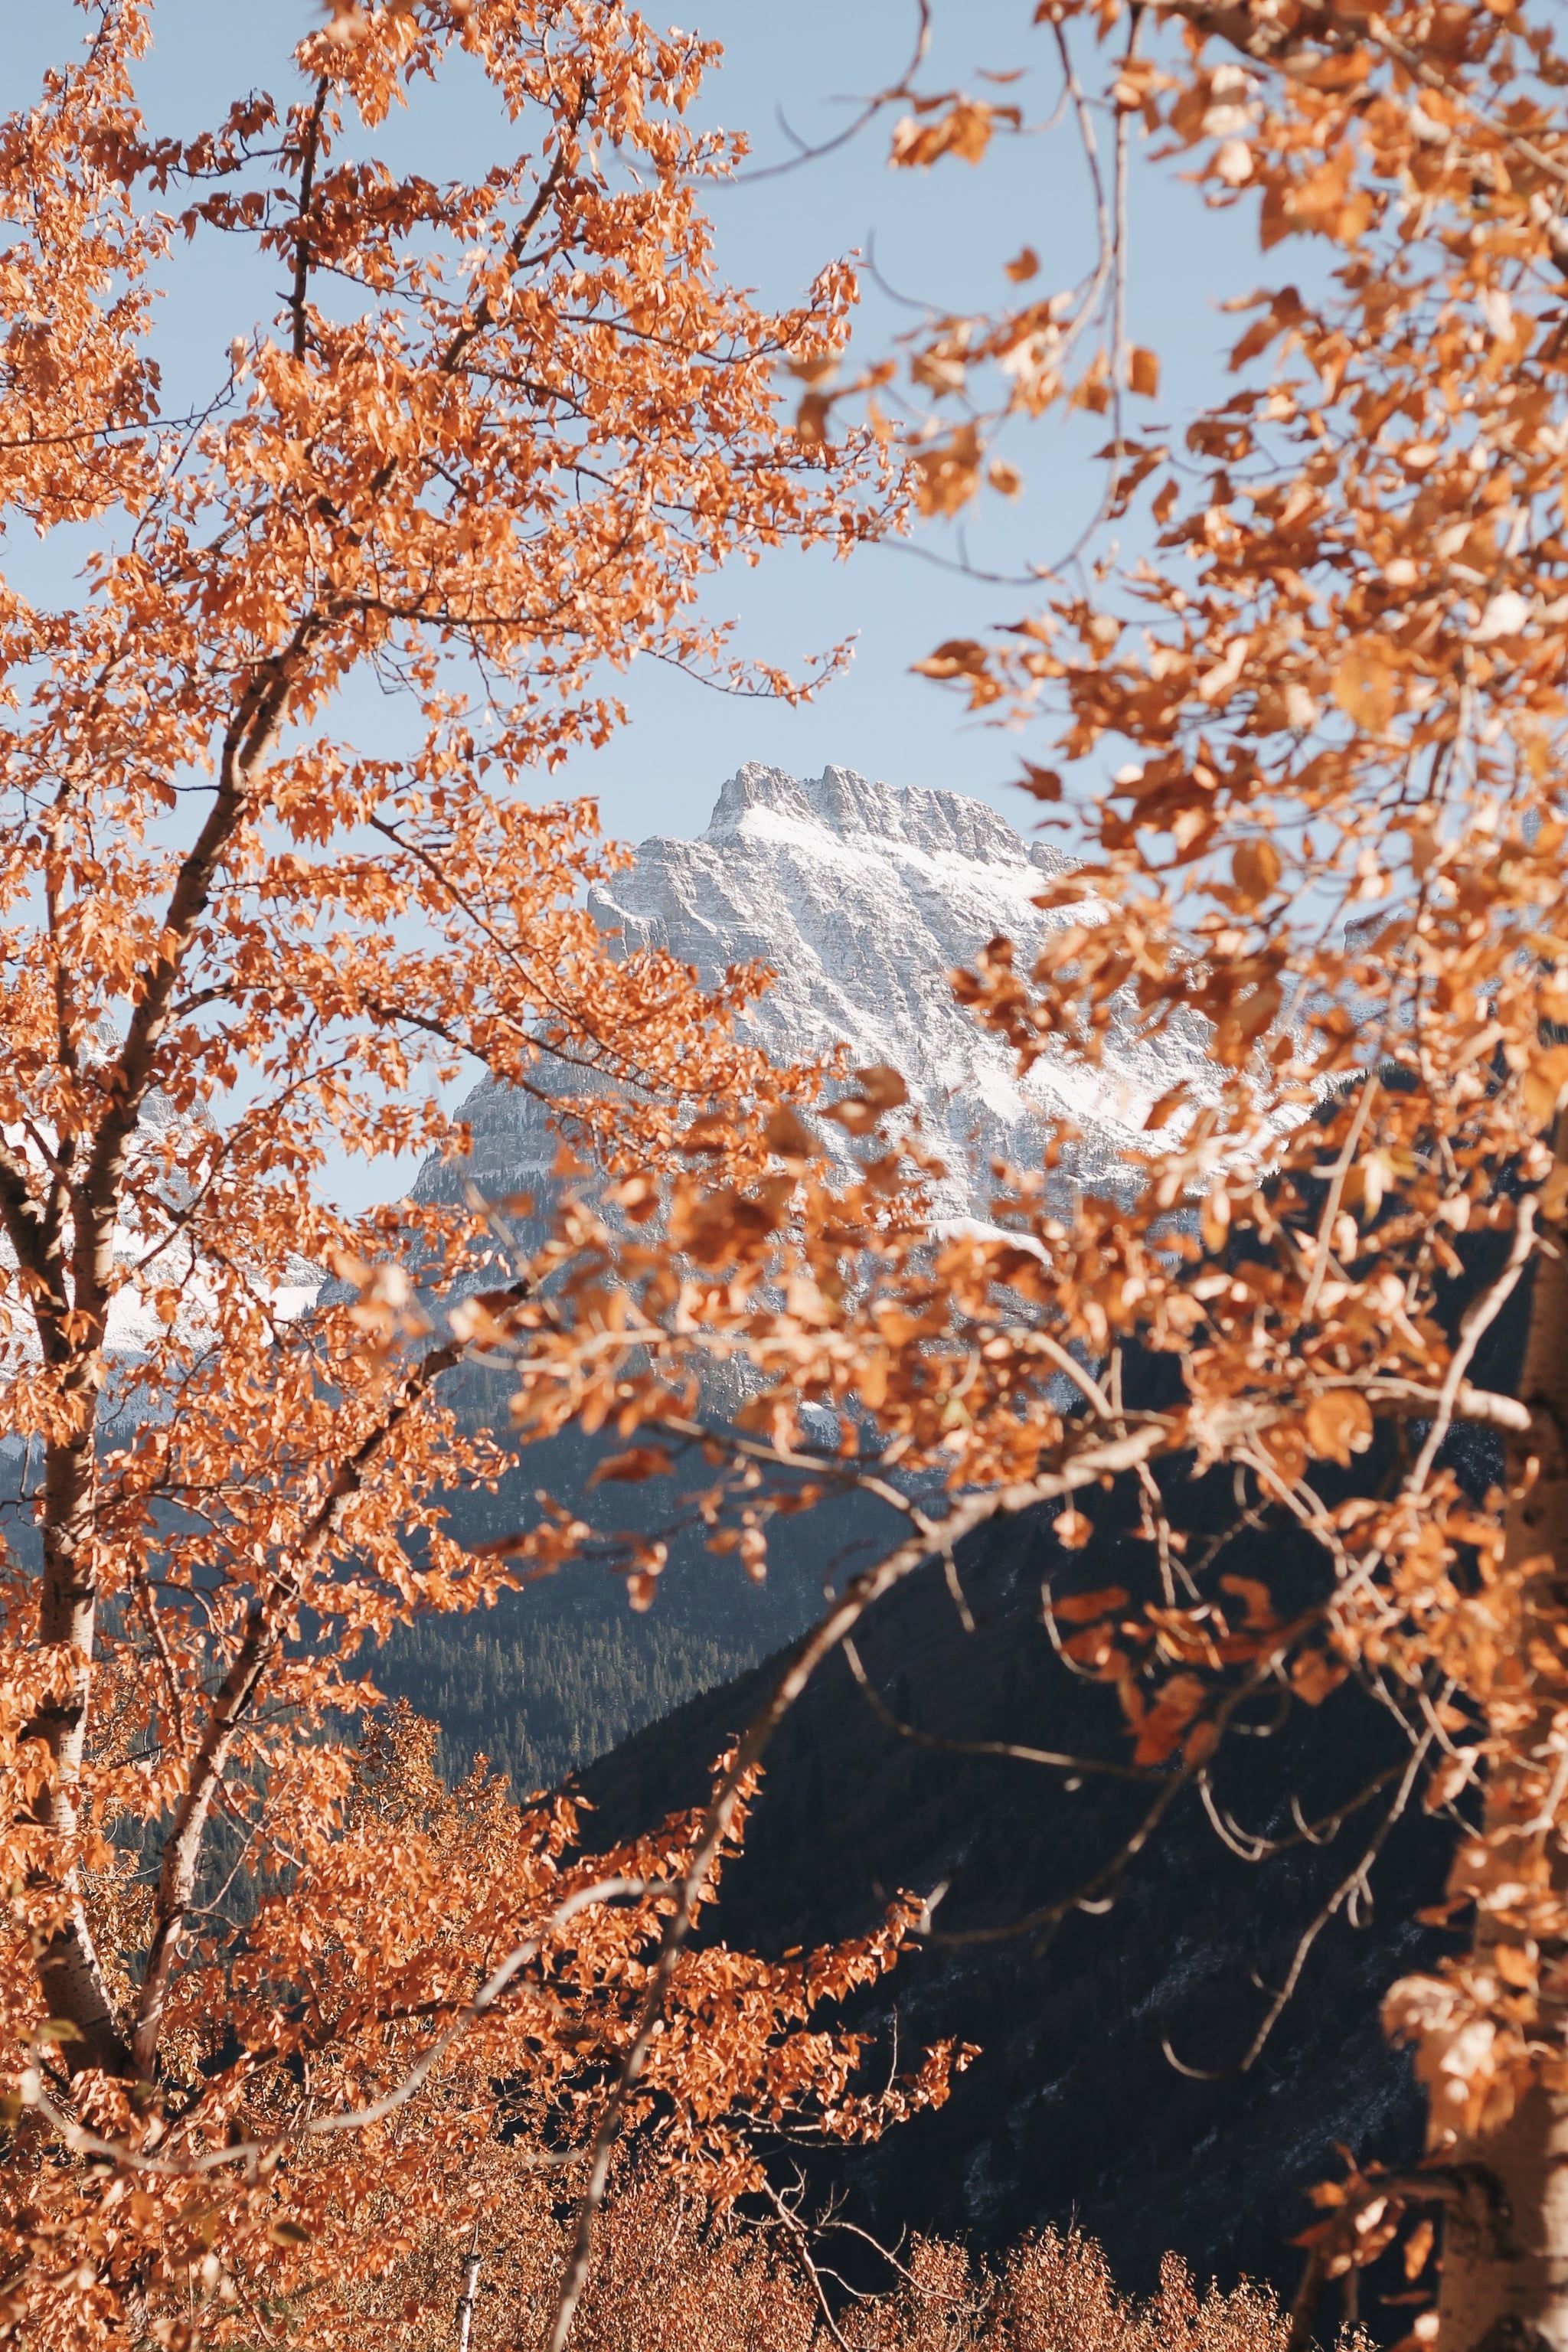 A mountain peak is obscured by orange leaves on a tree. - Fall, fall iPhone, leaves, snow, vintage fall, photography, bling, warm